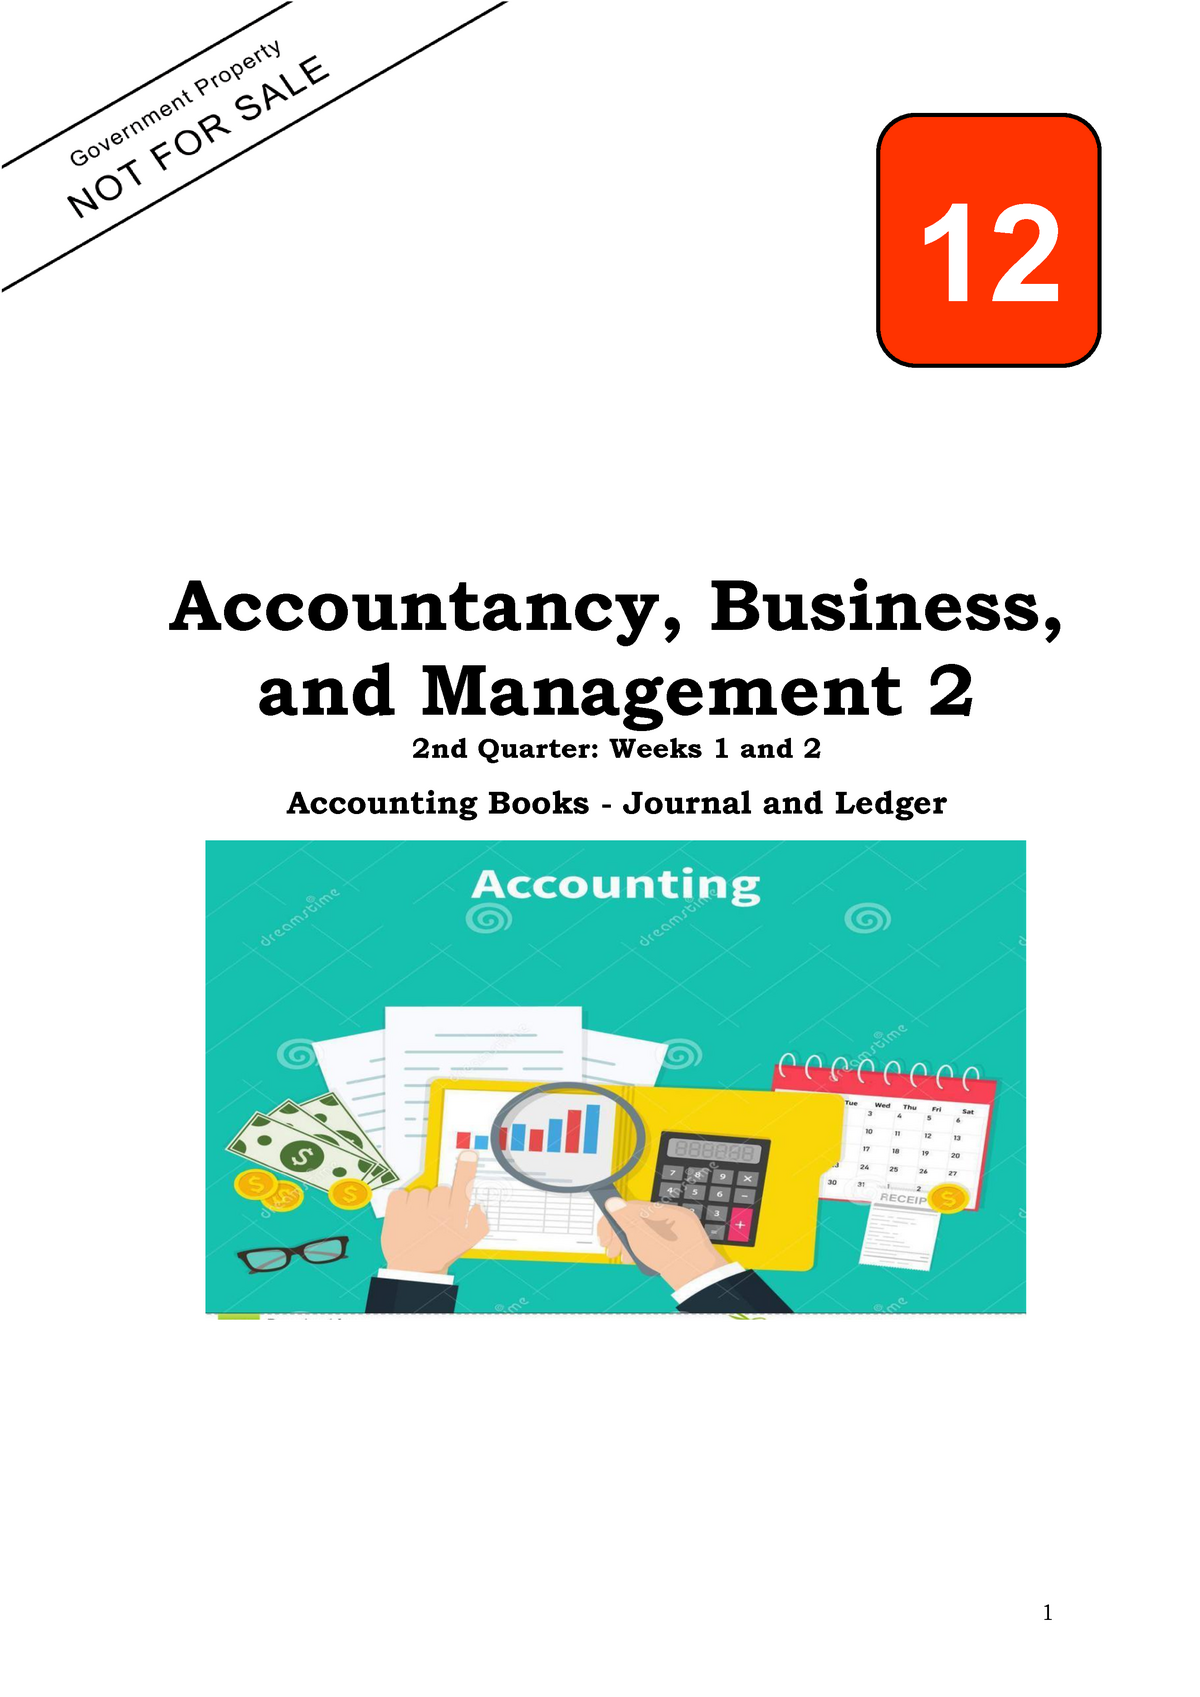 quantitative research about accountancy business and management